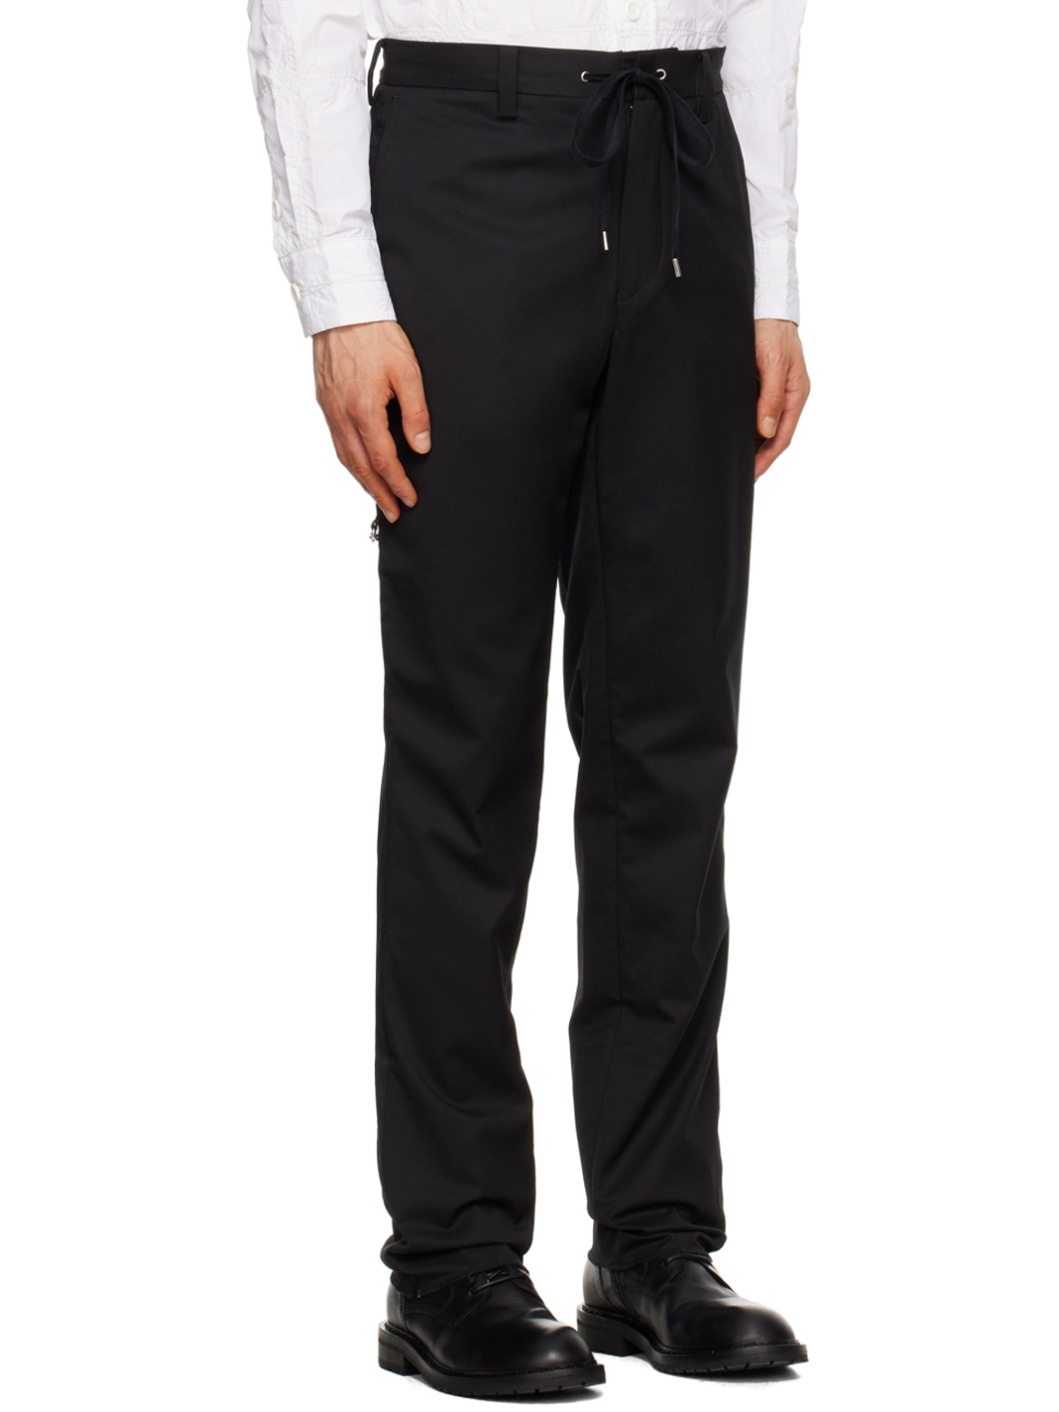 Black Convertible Trousers - 2